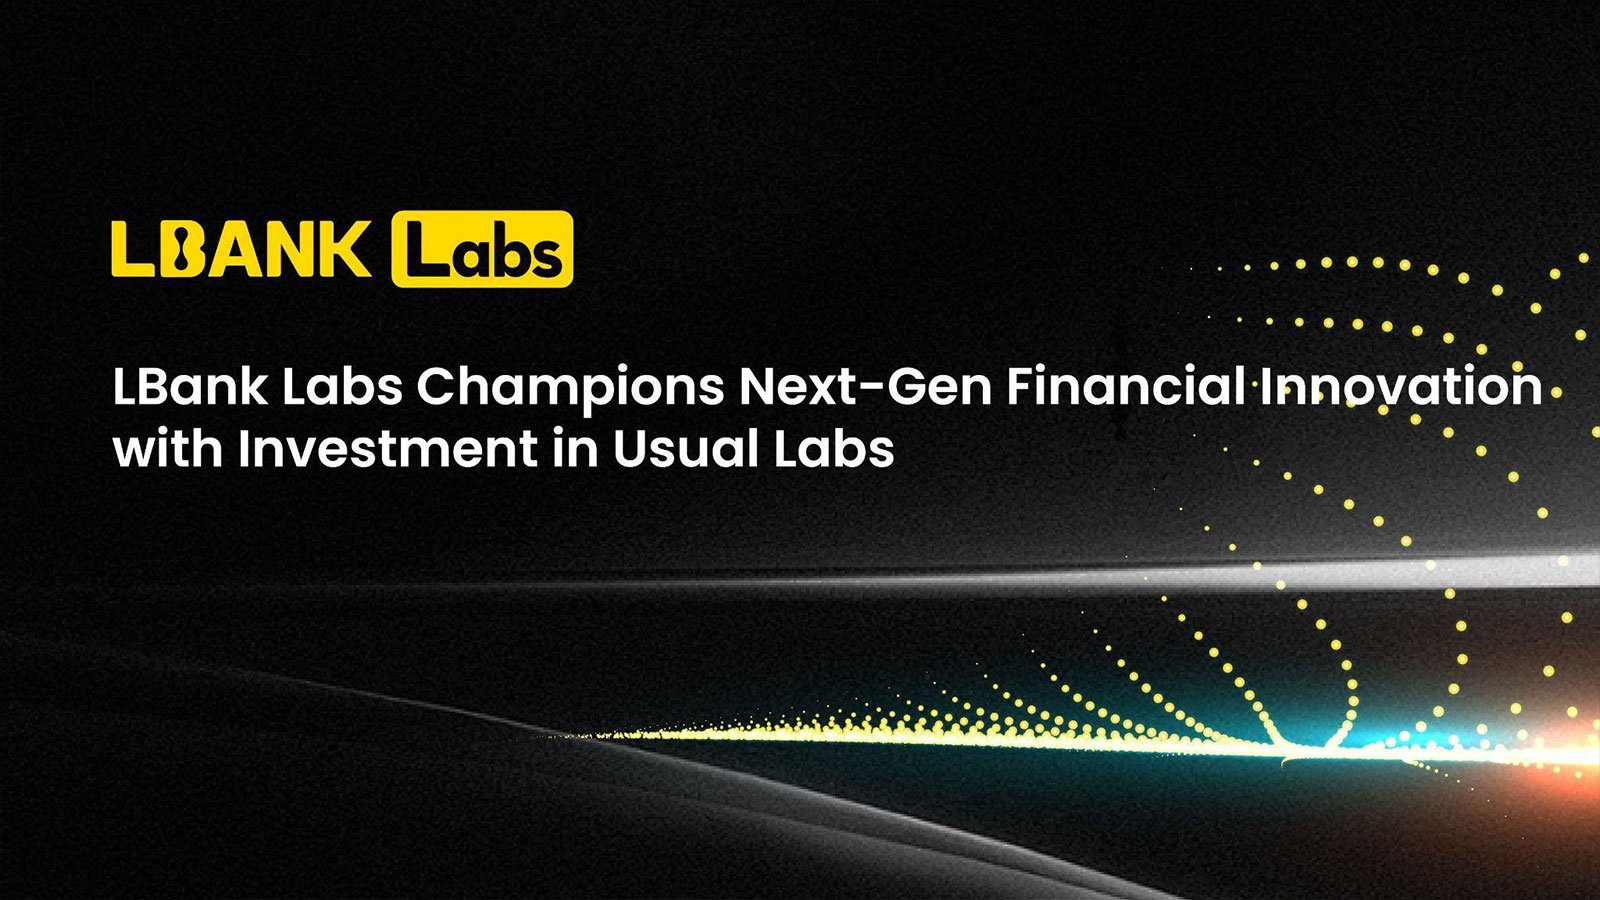 LBank Labs Champions Next-Gen Financial Innovation with Investment in Usual Labs